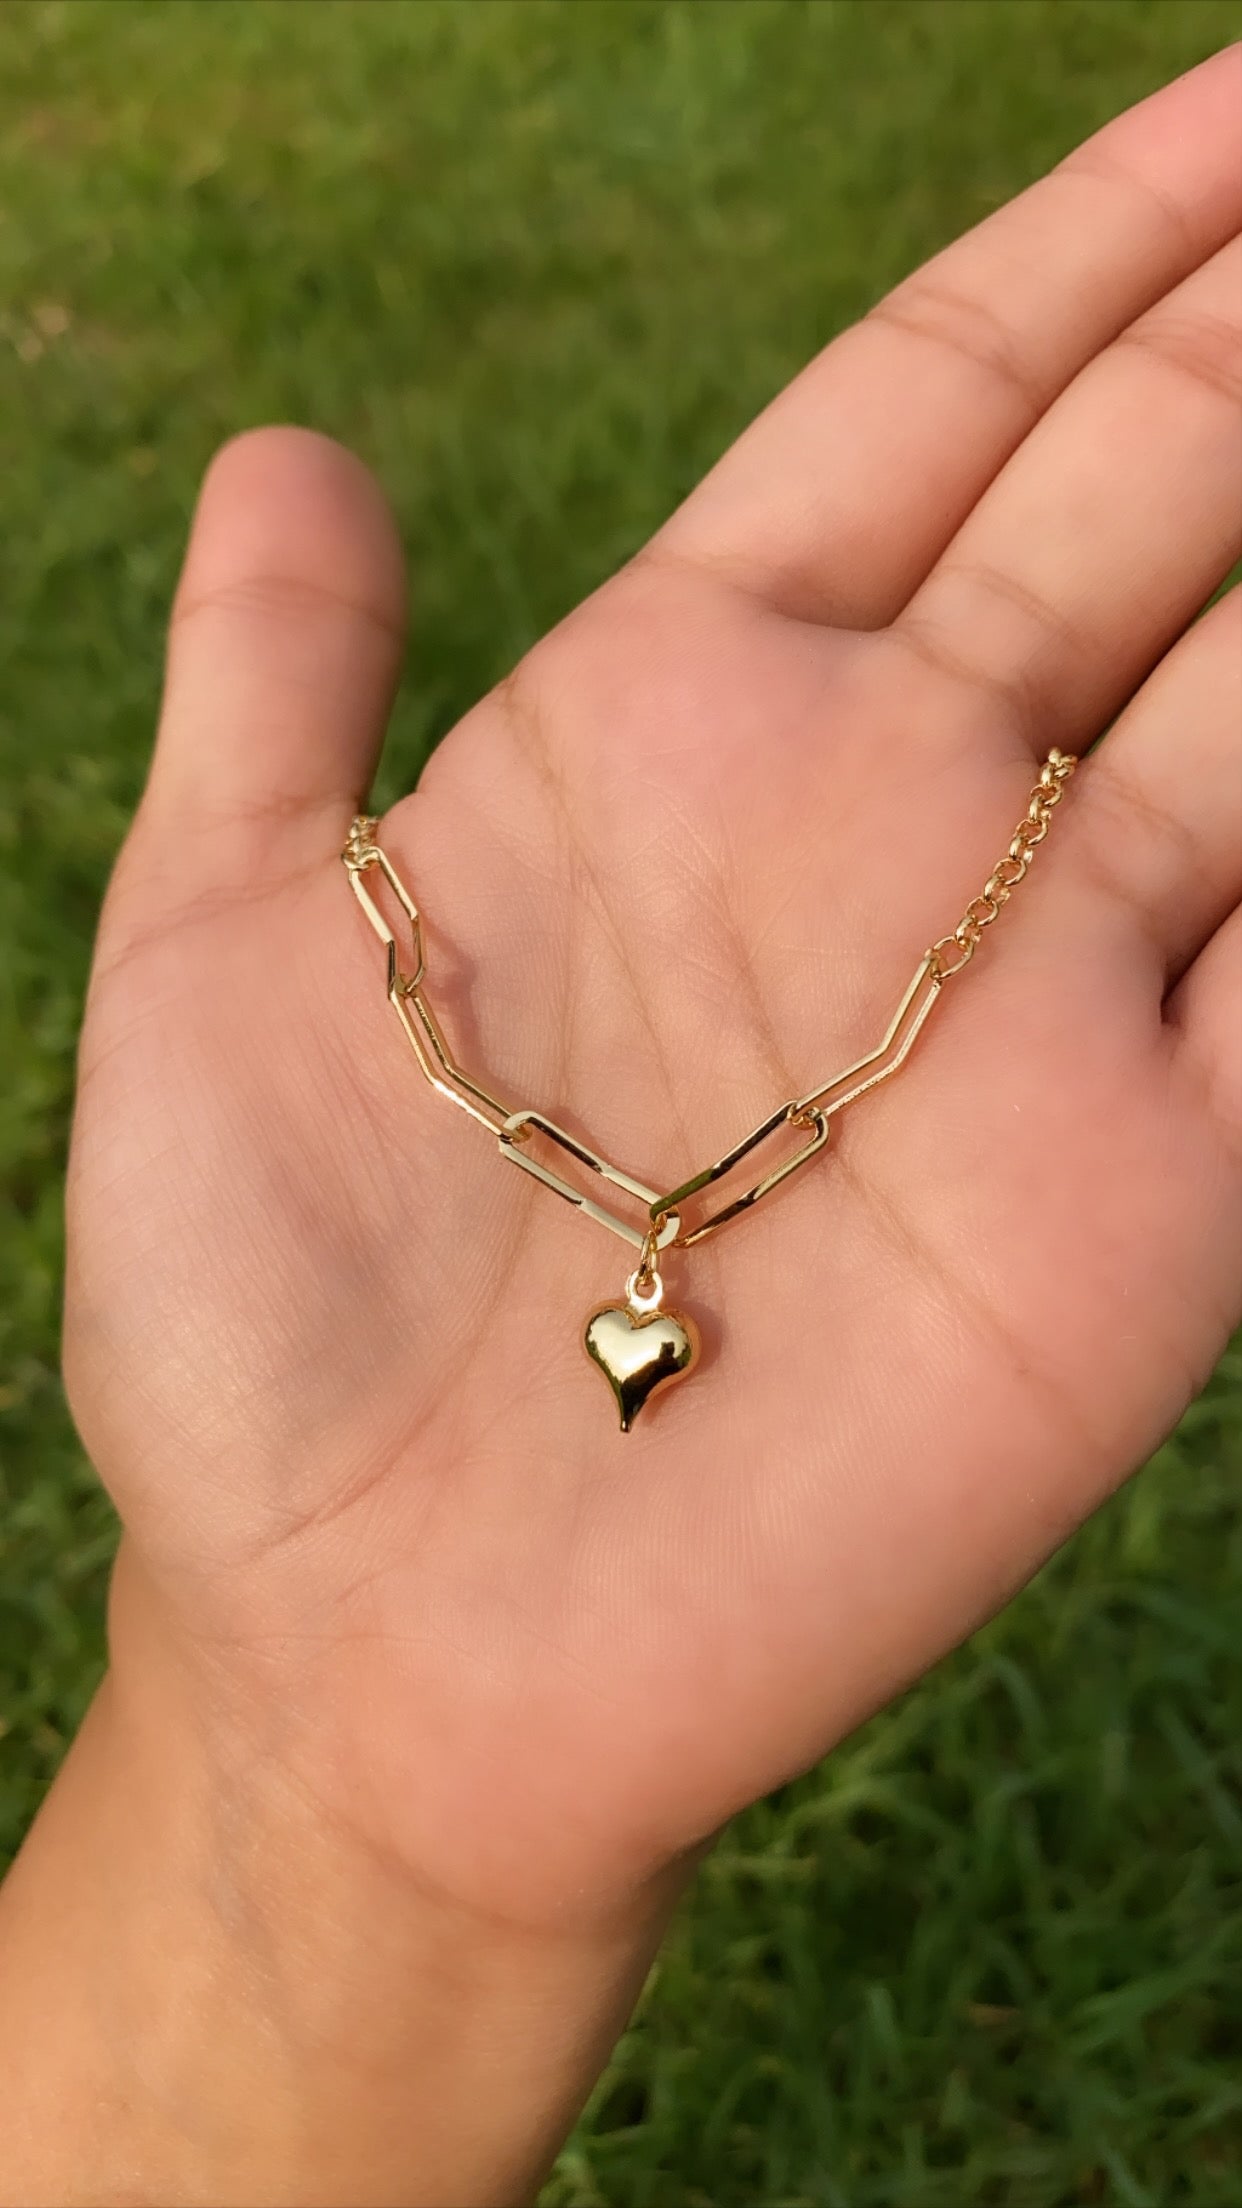 One heart anklet